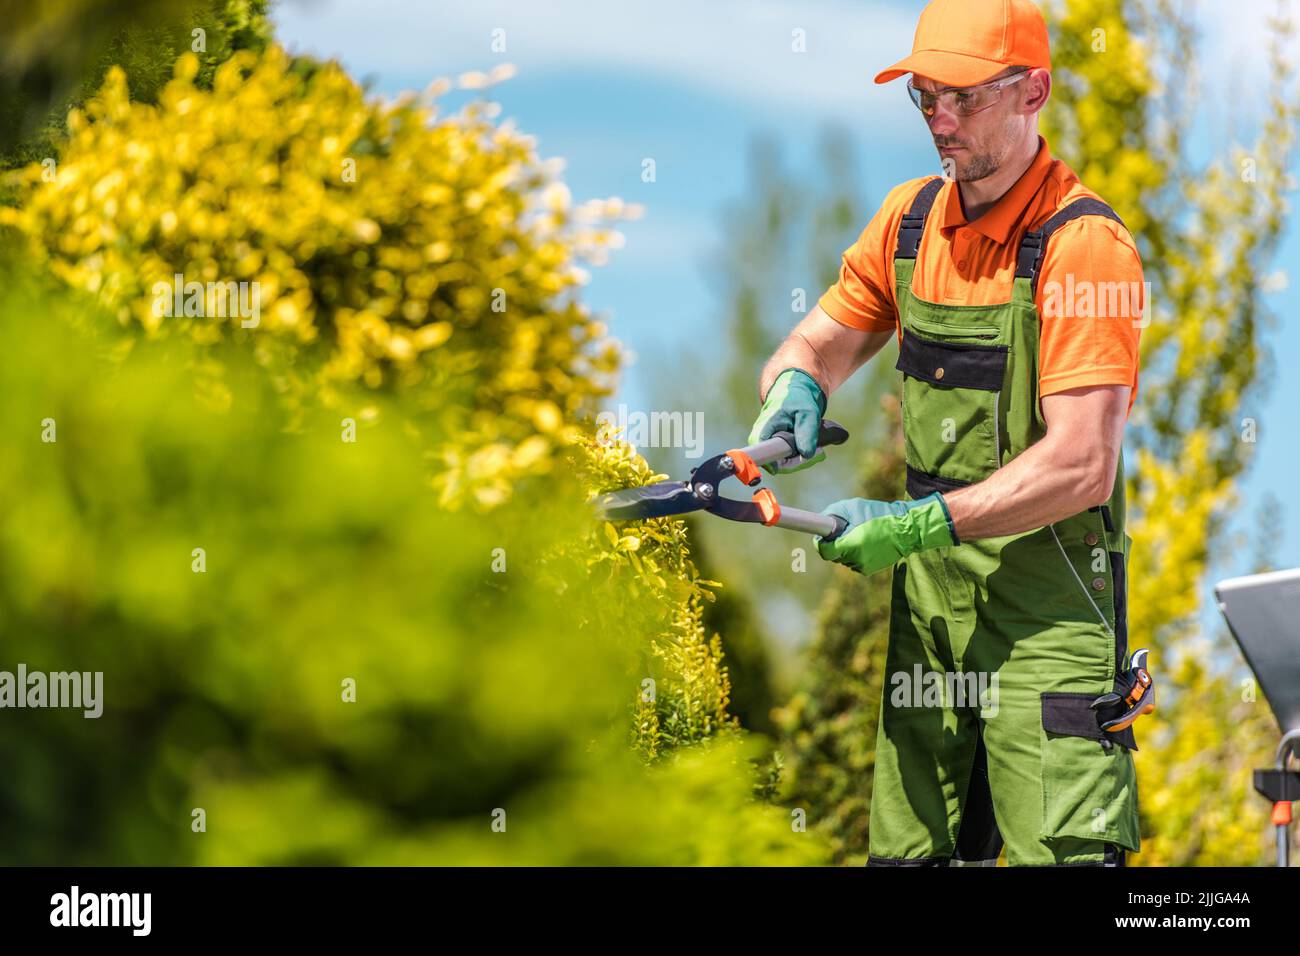 Caucasian Male Gardener at His 40s Taking Care of Appearance of Decorative Plant Using Garden Scissors Tool. Seasonal Work. Garden Landscaping and Mai Stock Photo